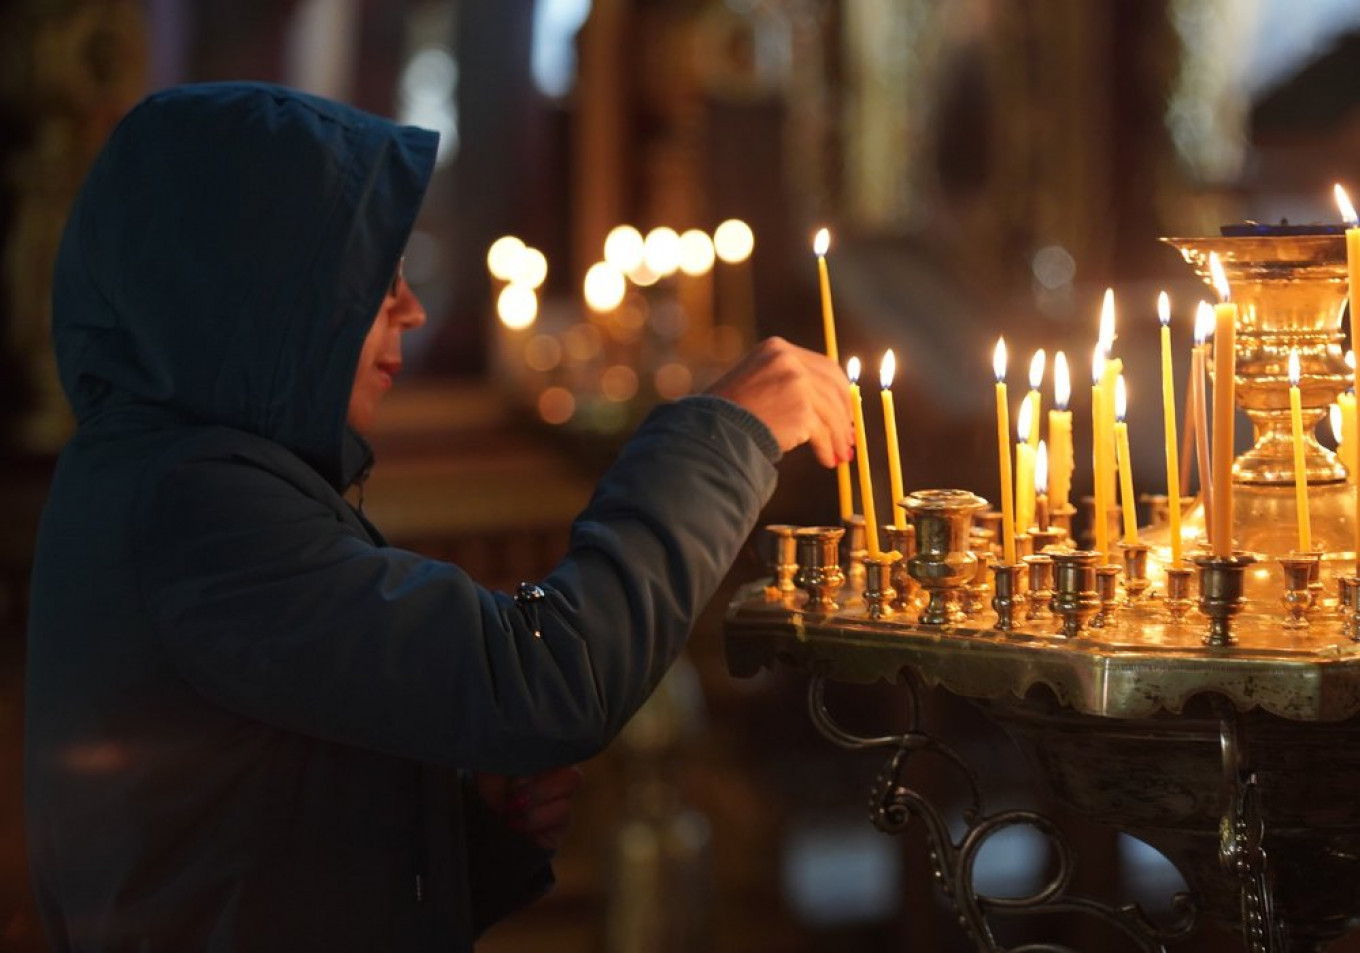 Don’t Perform Exorcisms at Home, Russian Orthodox Church Warns